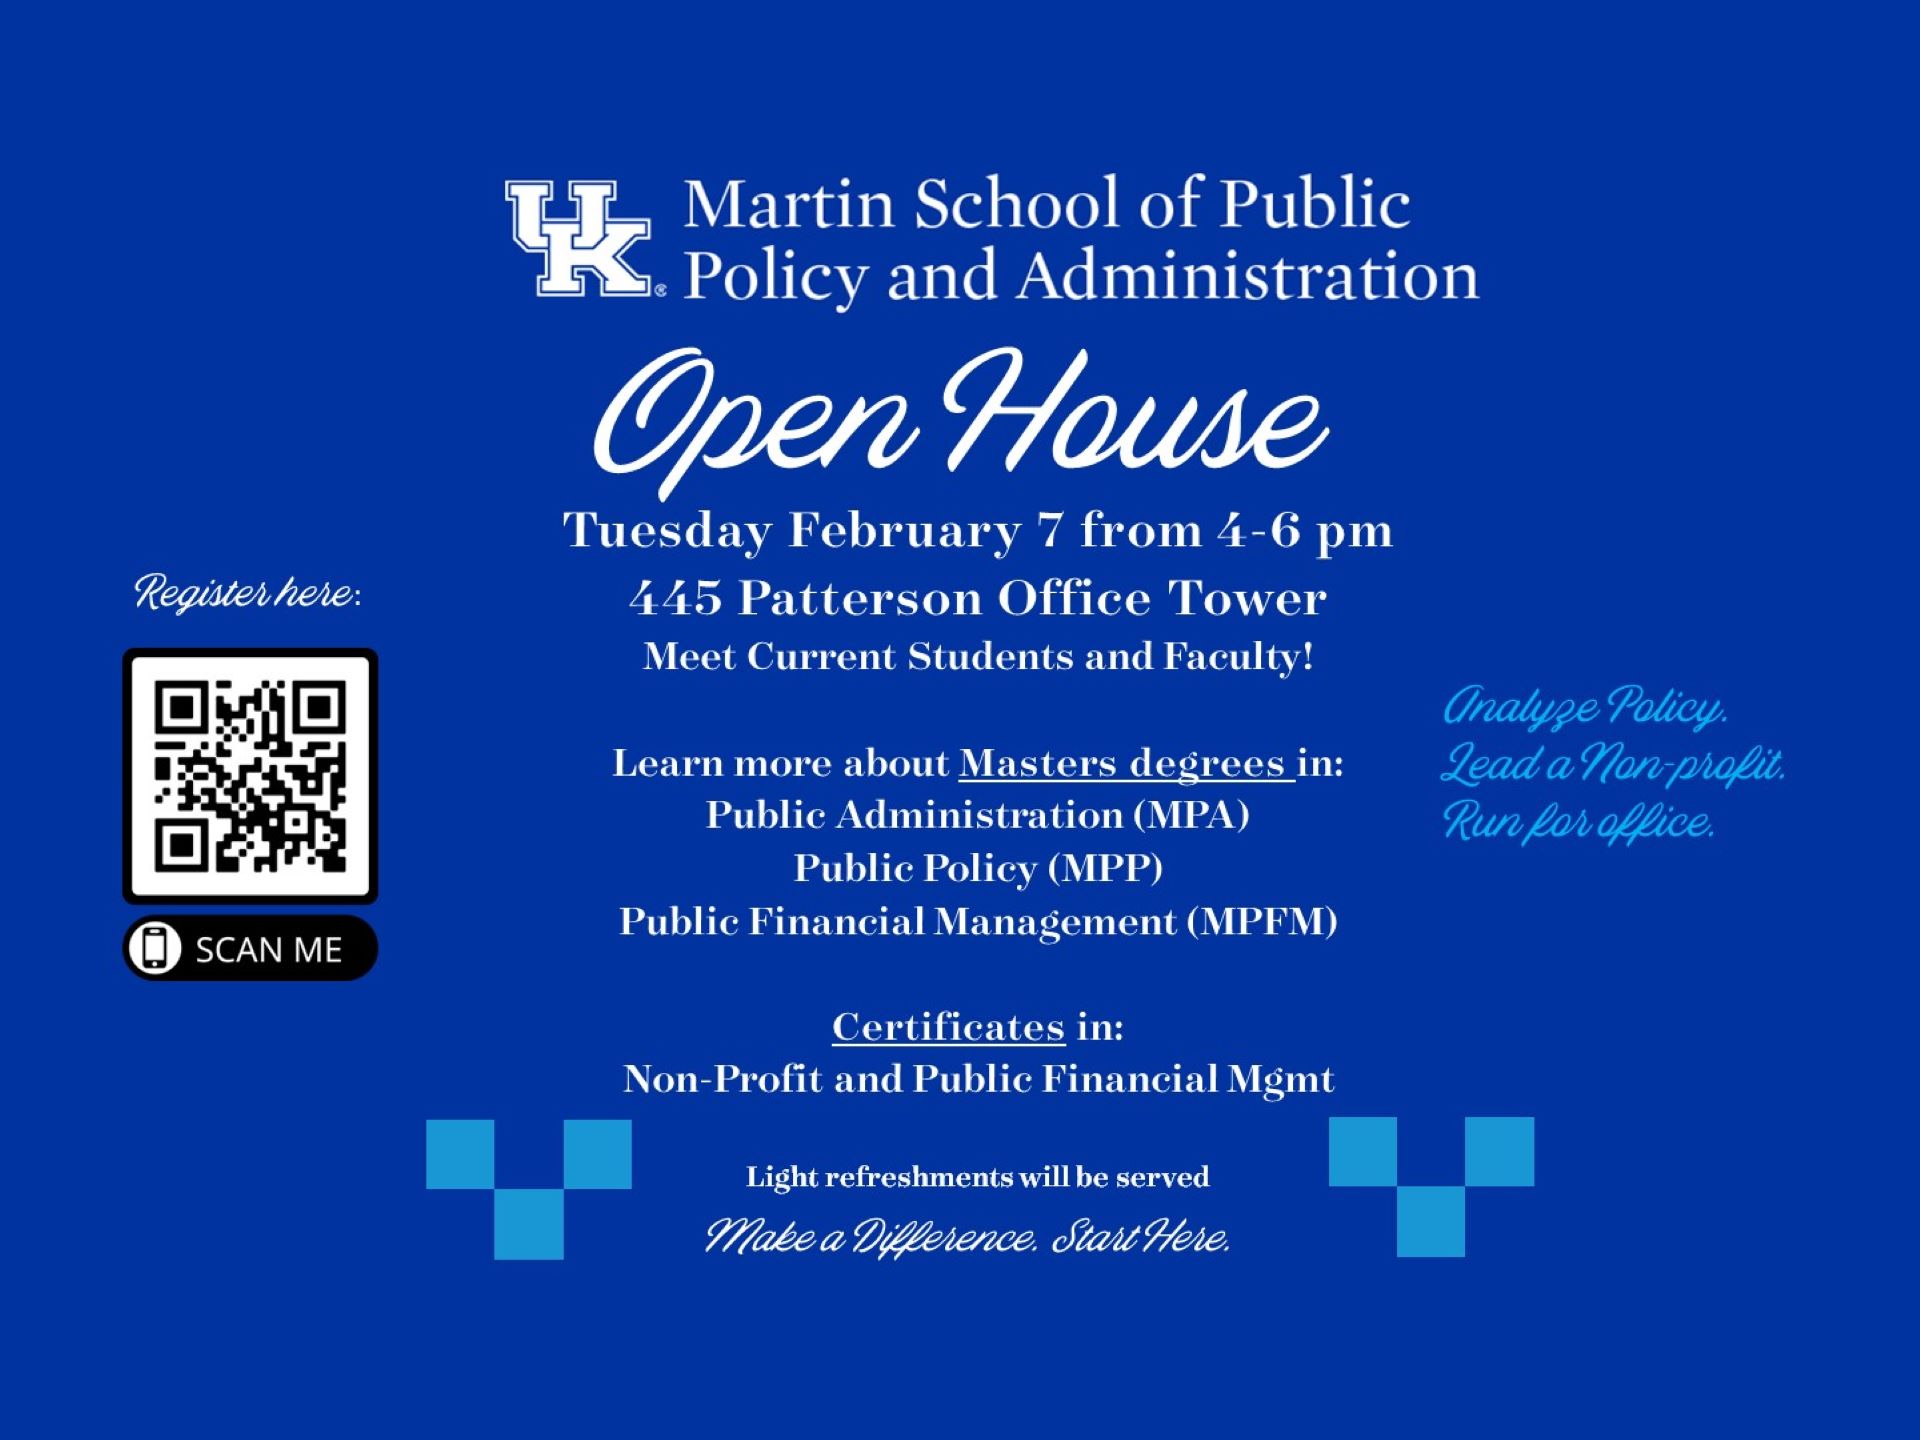 MS open house